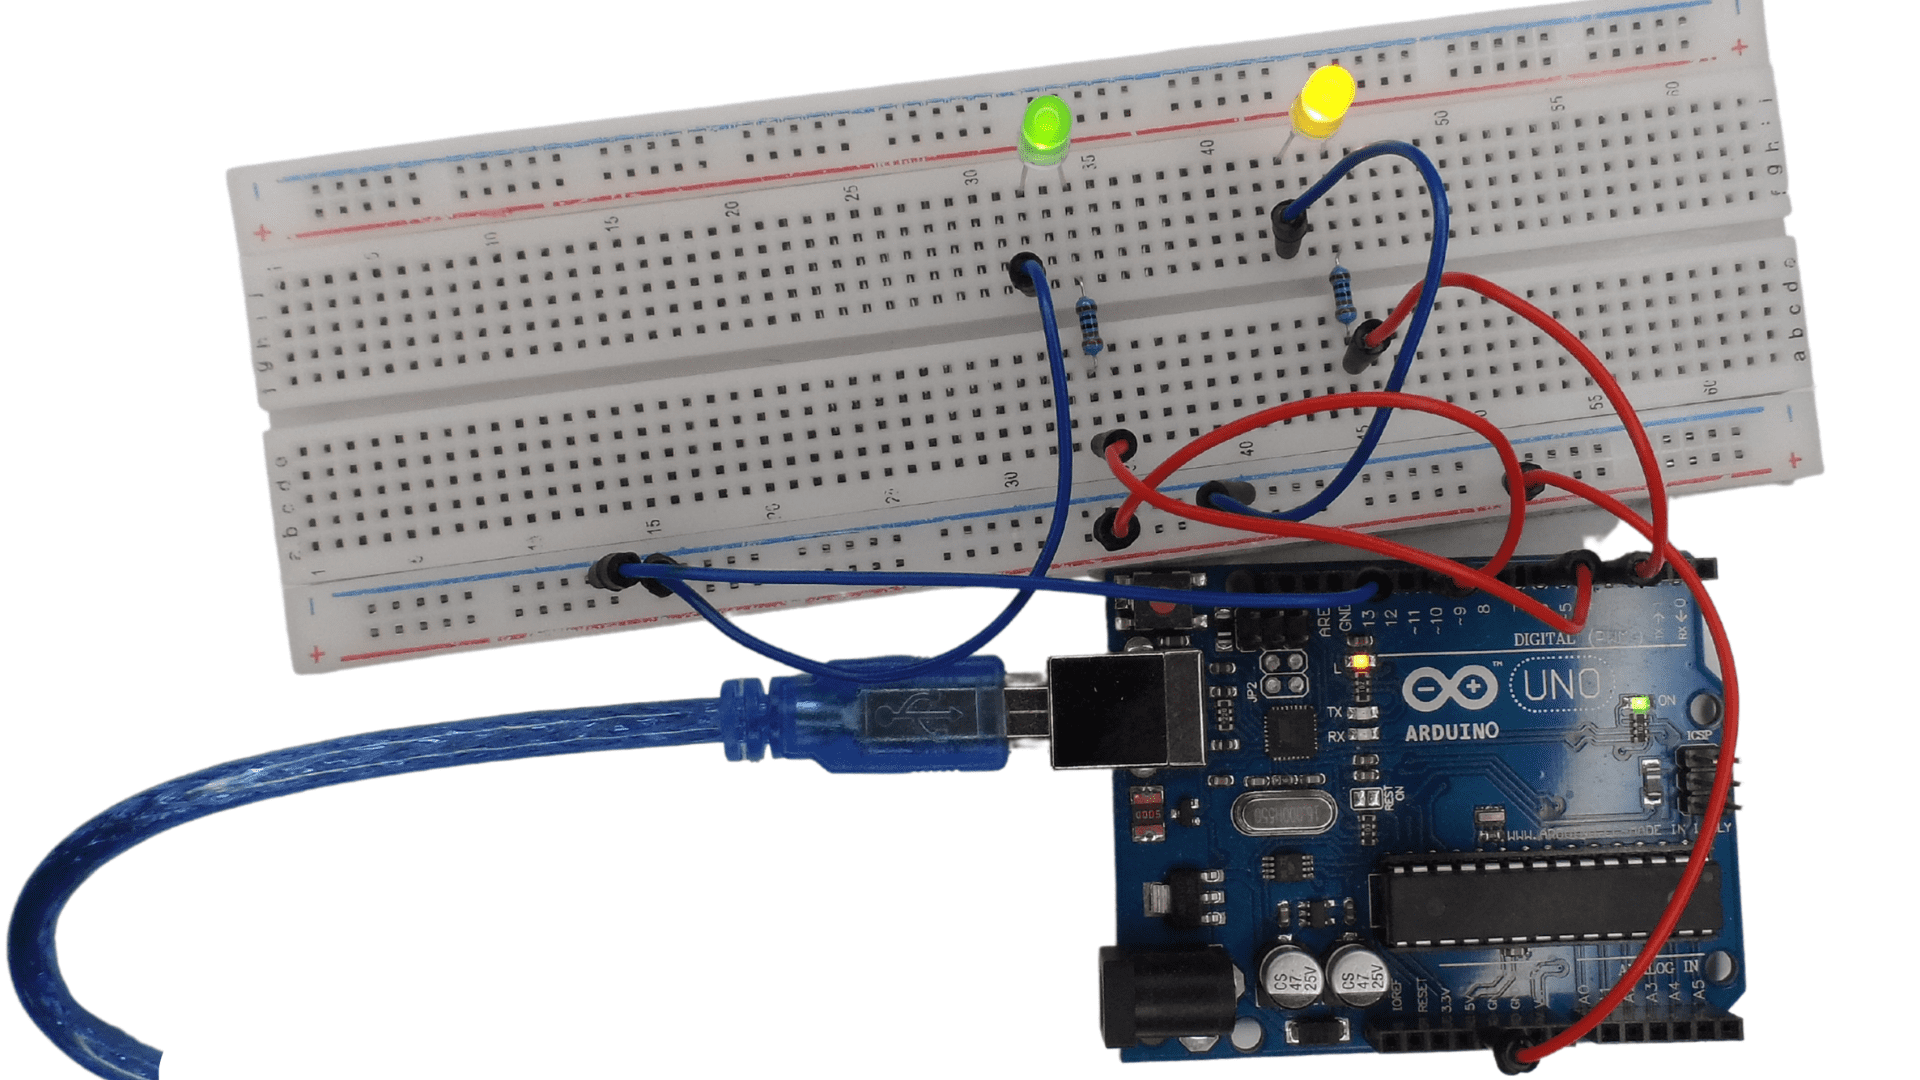 LEDs Arduino Uno project